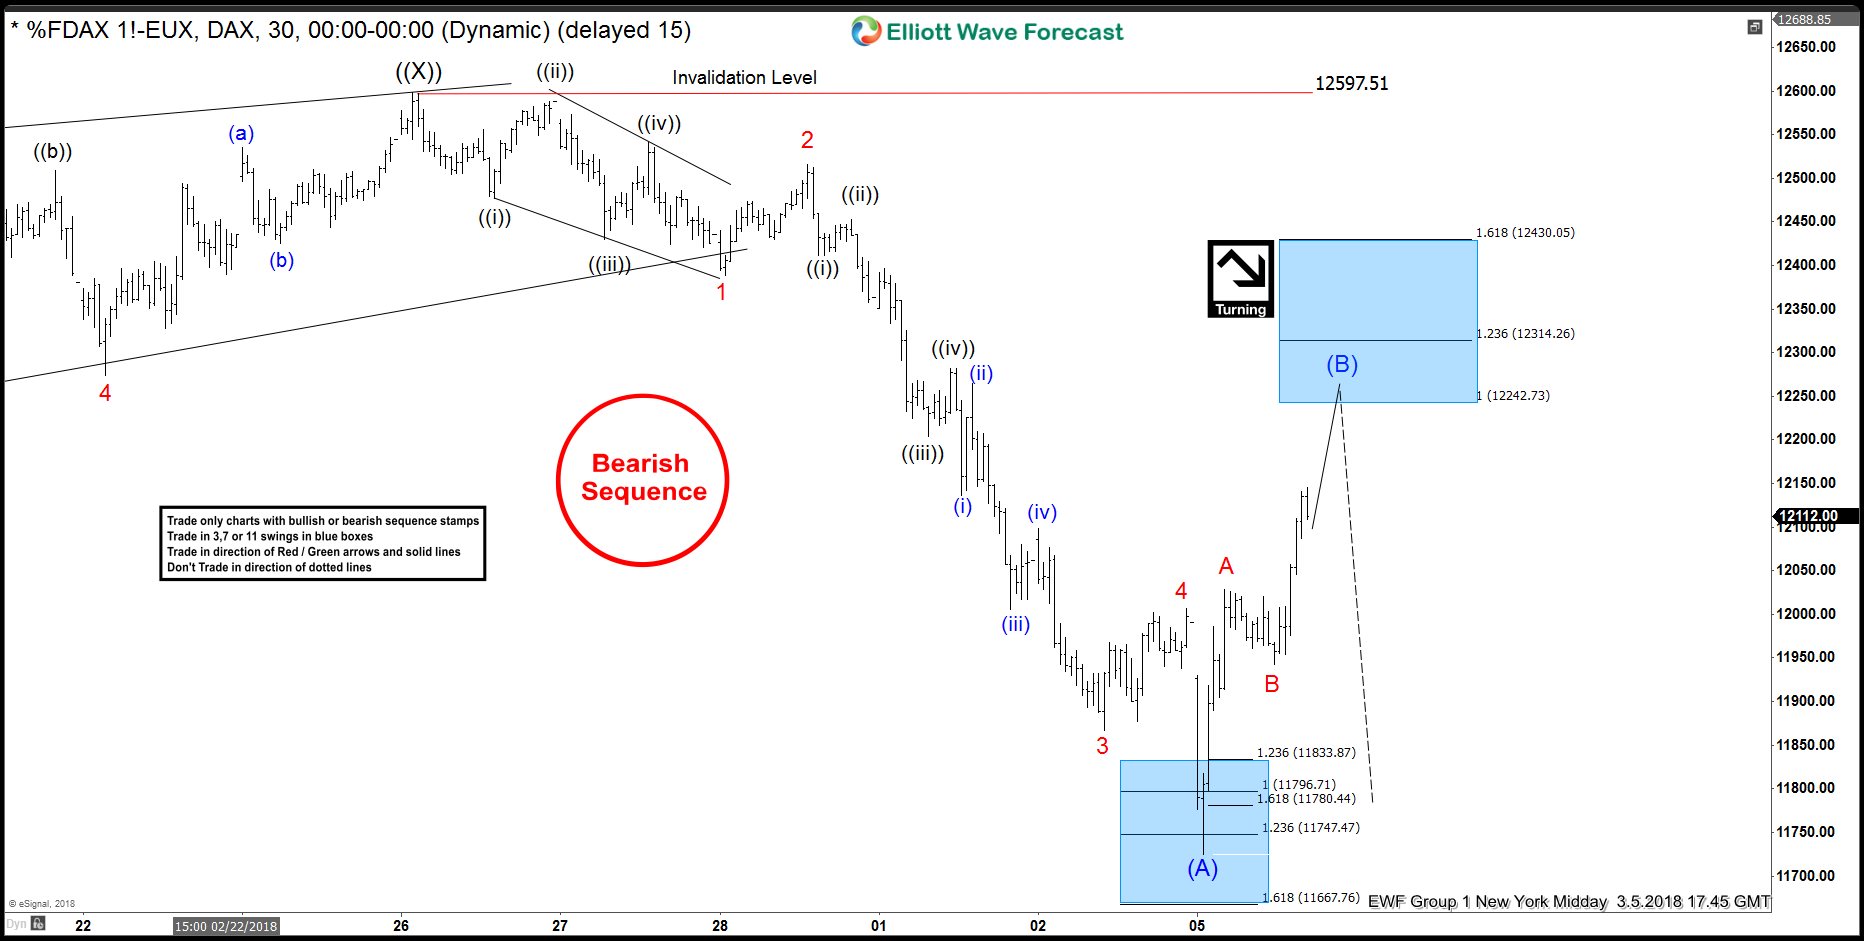 DAX Elliott wave view: Calling for another extension lower